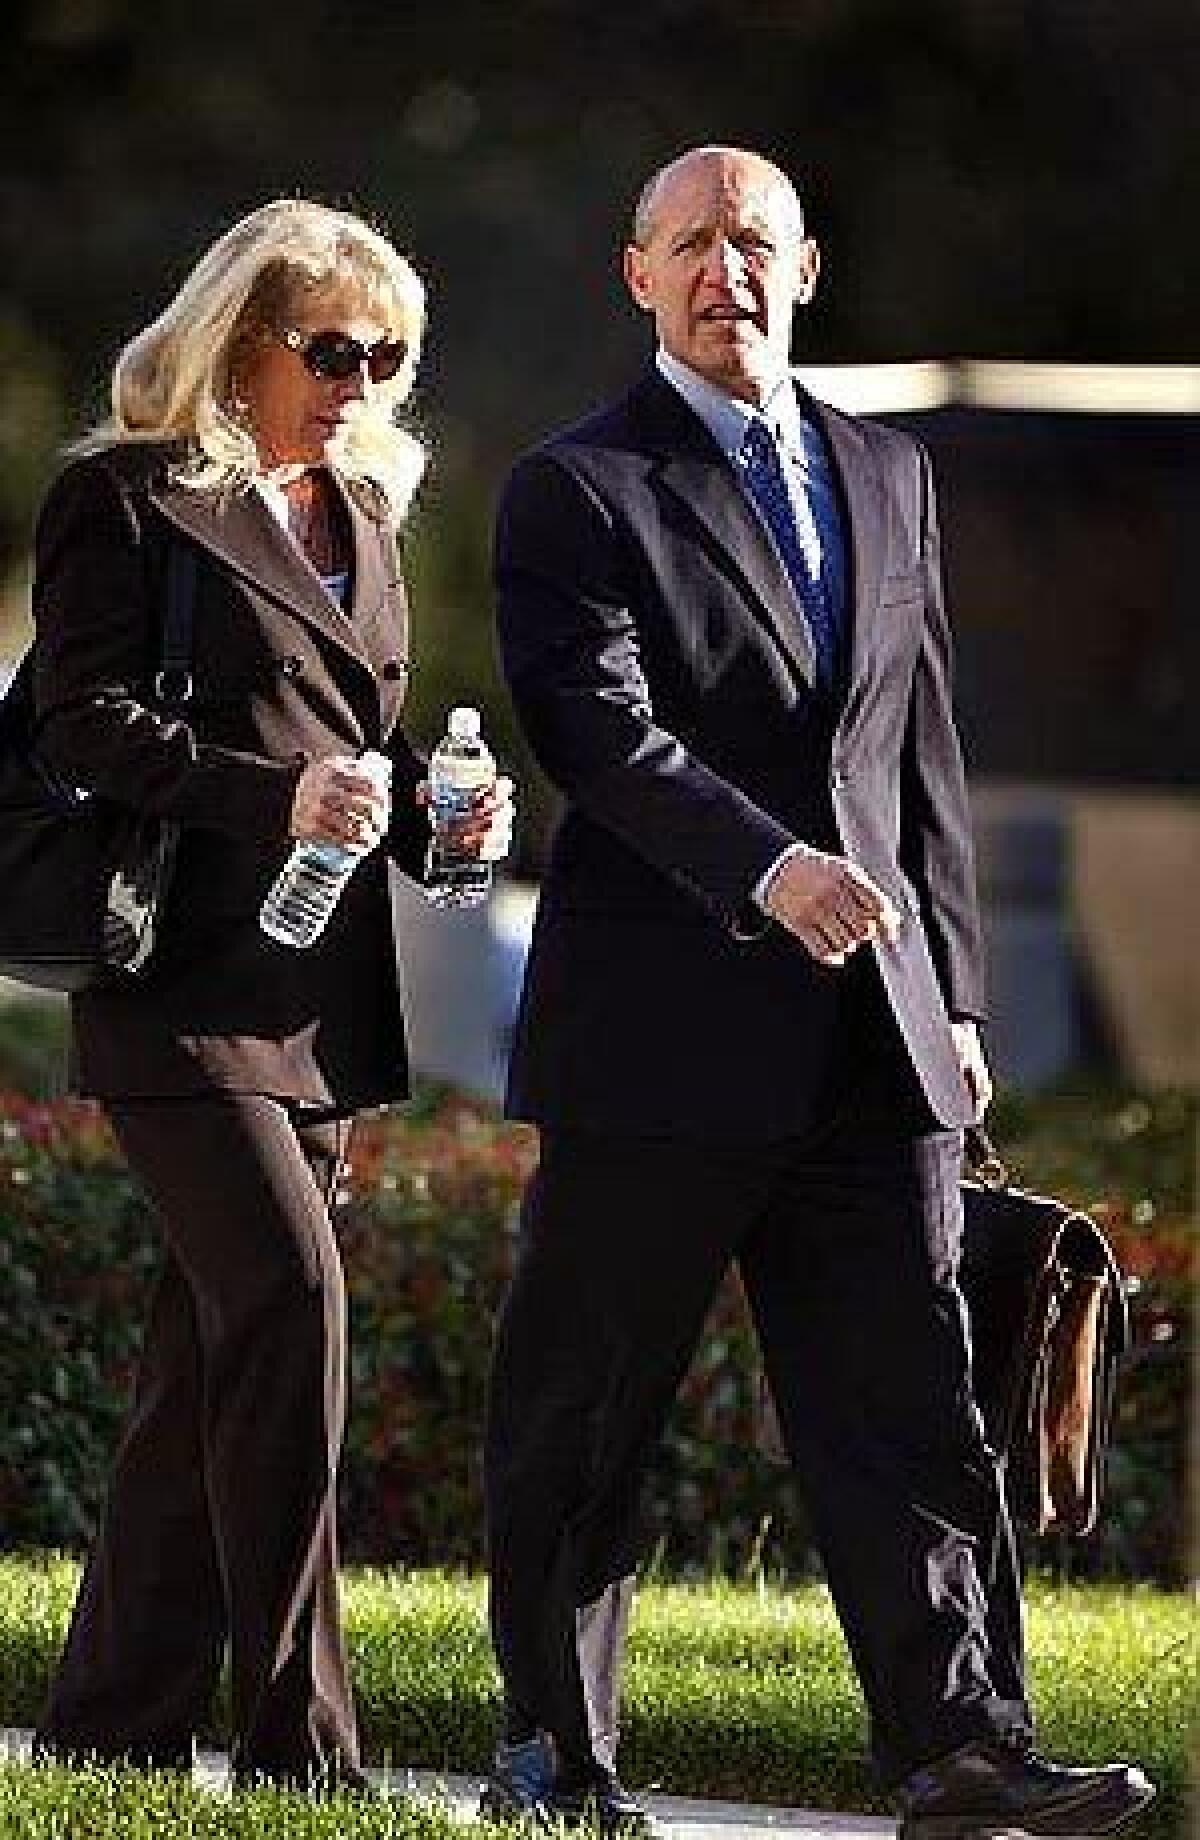 Former Orange County Sheriff Michael S. Carona and wife Deborah arrive at the federal courthouse in Santa Ana. A jury is expected to begin deliberations today in the corruption case against Carona.